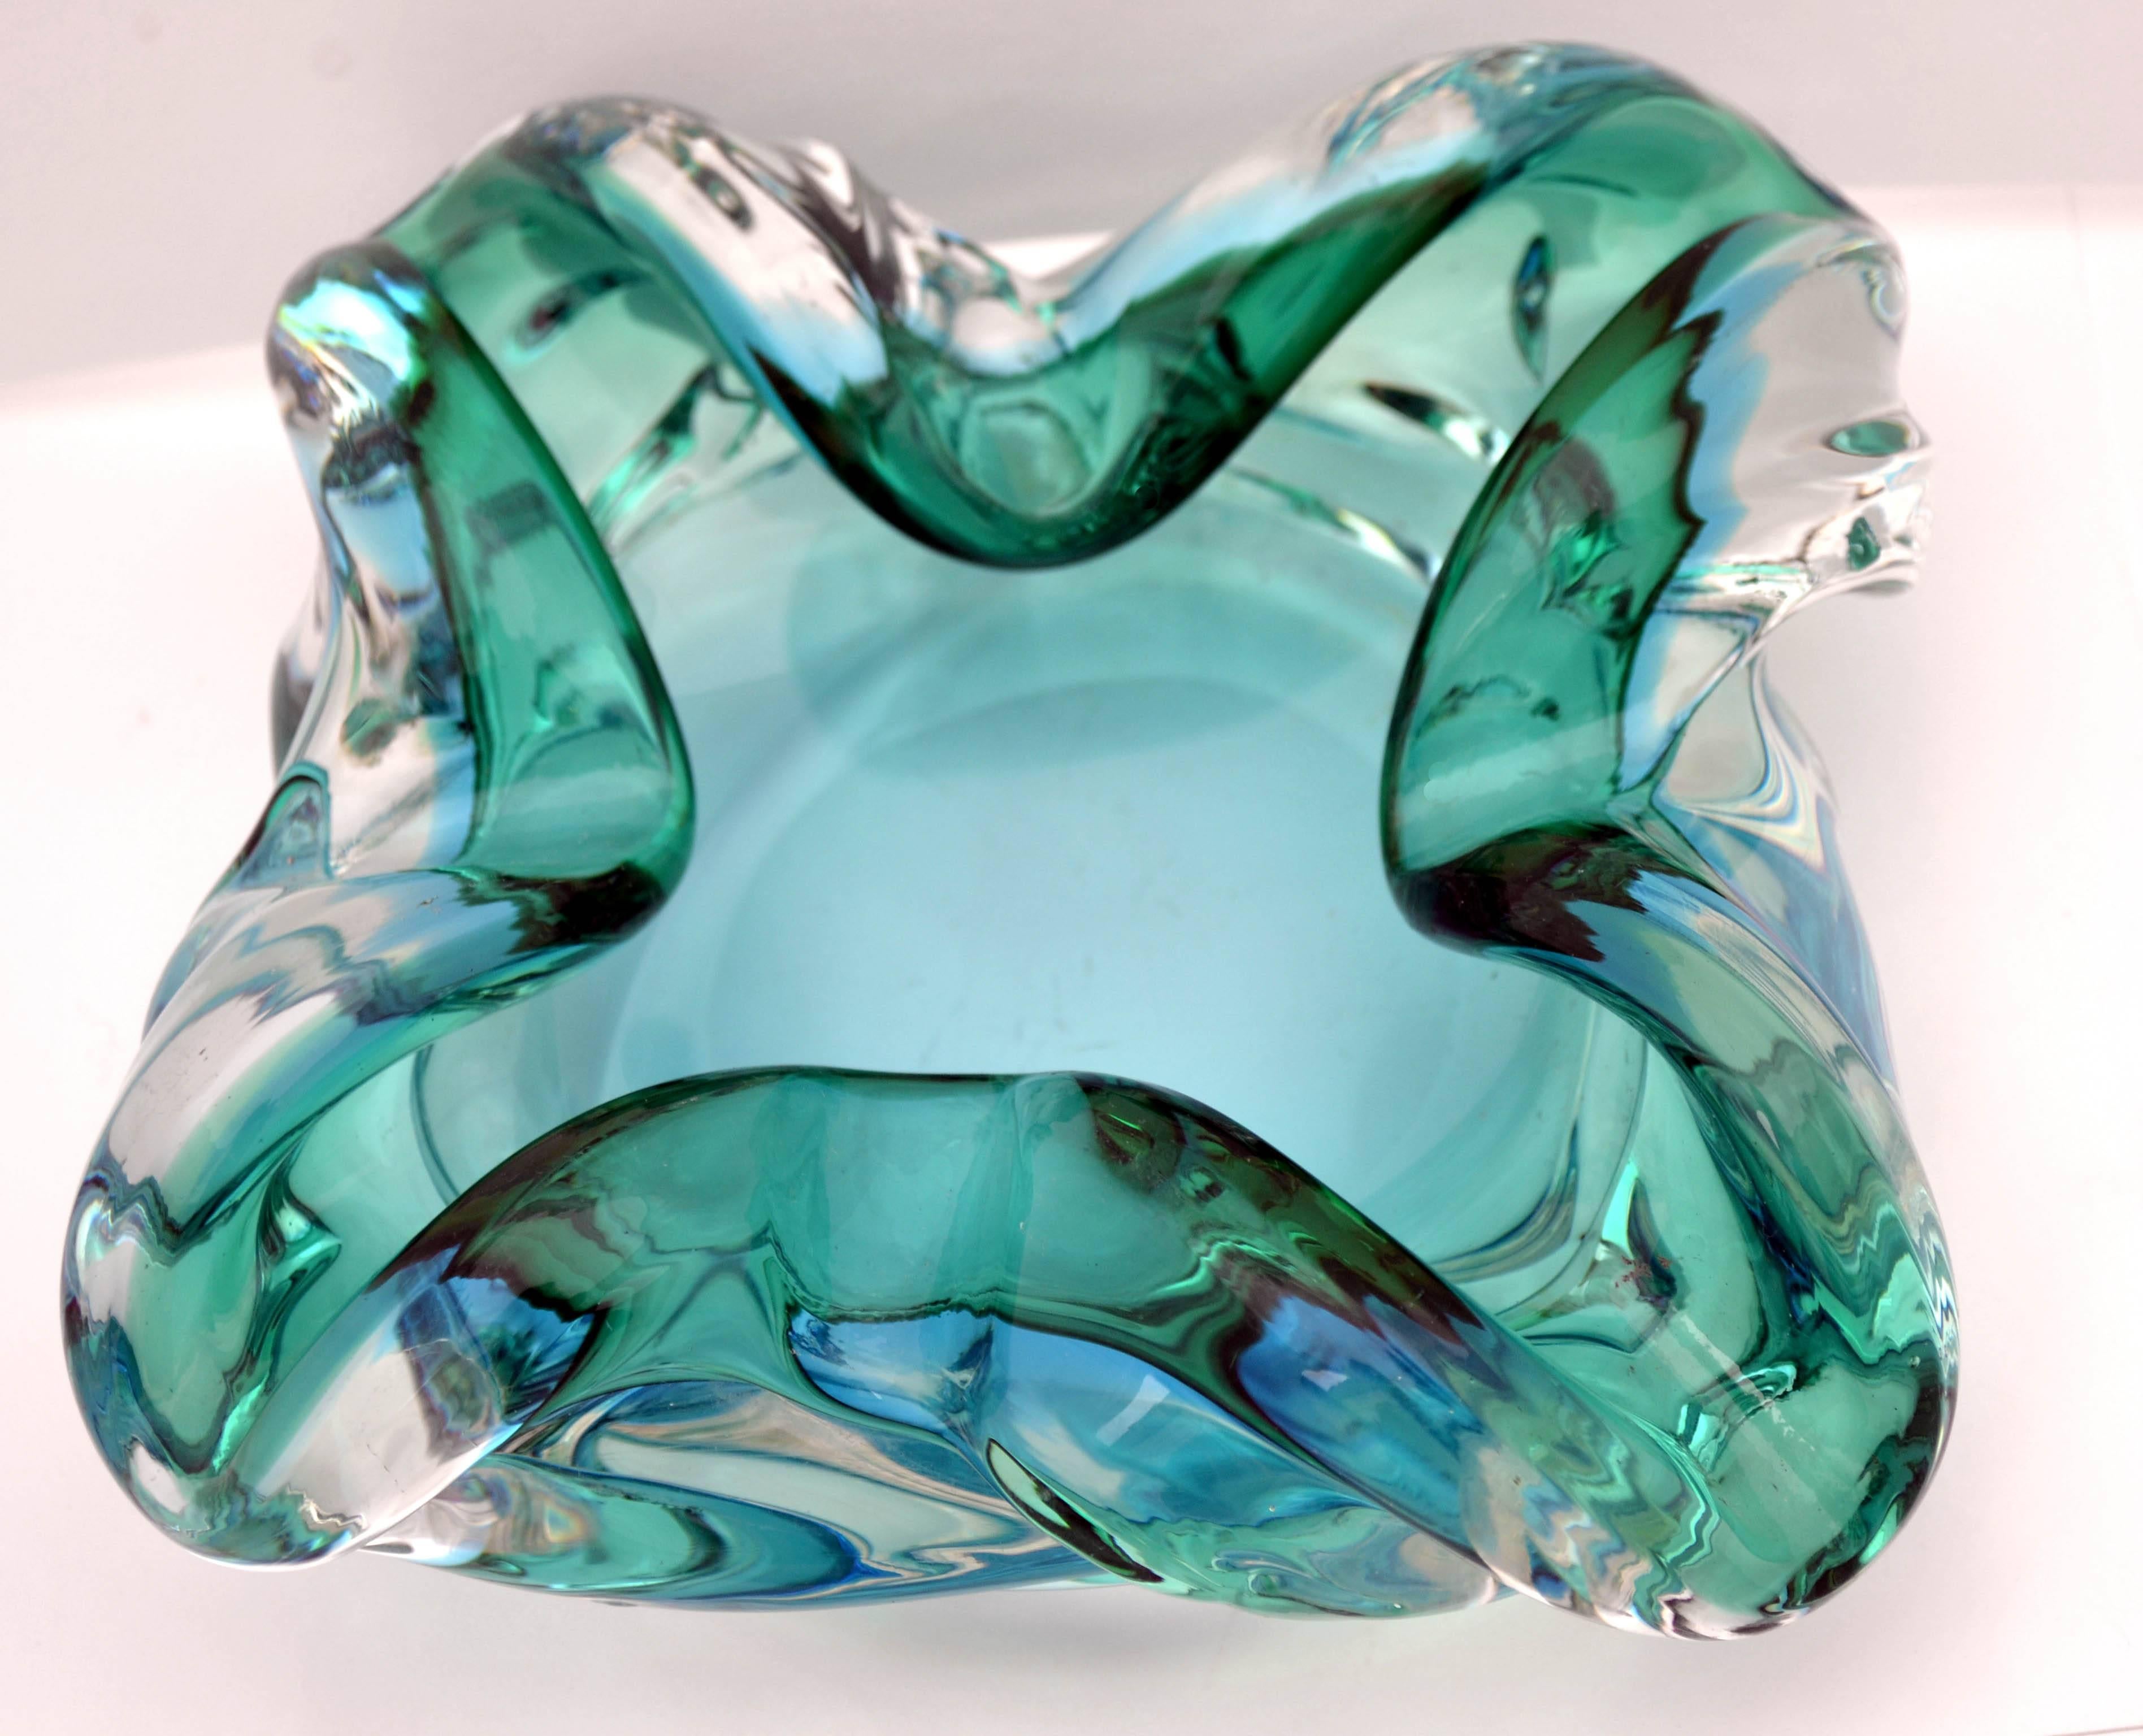 Beautiful organic-shaped Murano blue, green and clear Archimede Seguso Flavio Poli Sommerso bowl (or ashtray) for a thoroughly stylish and modern room or office. Measures: 9